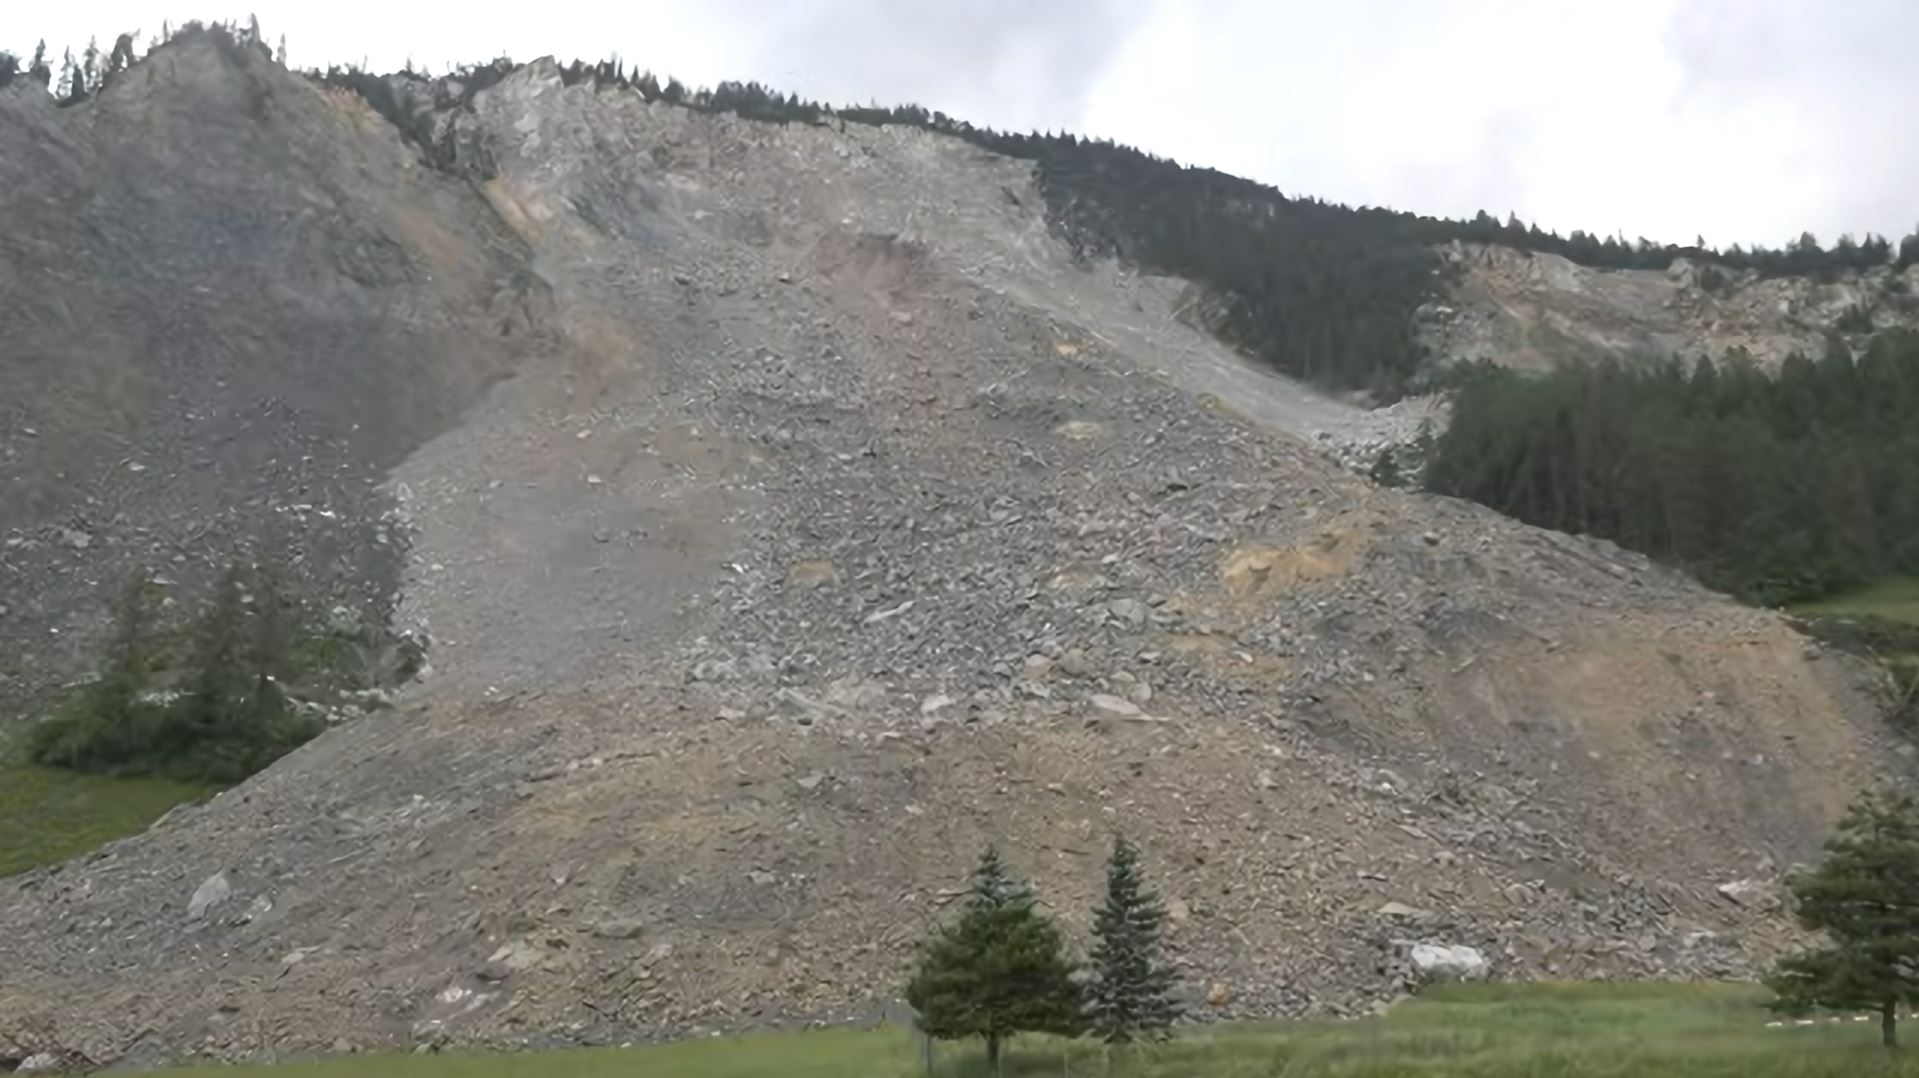 The aftermath of the major landslide at Brienz-Brinzauls on 15/16 June 2023. 